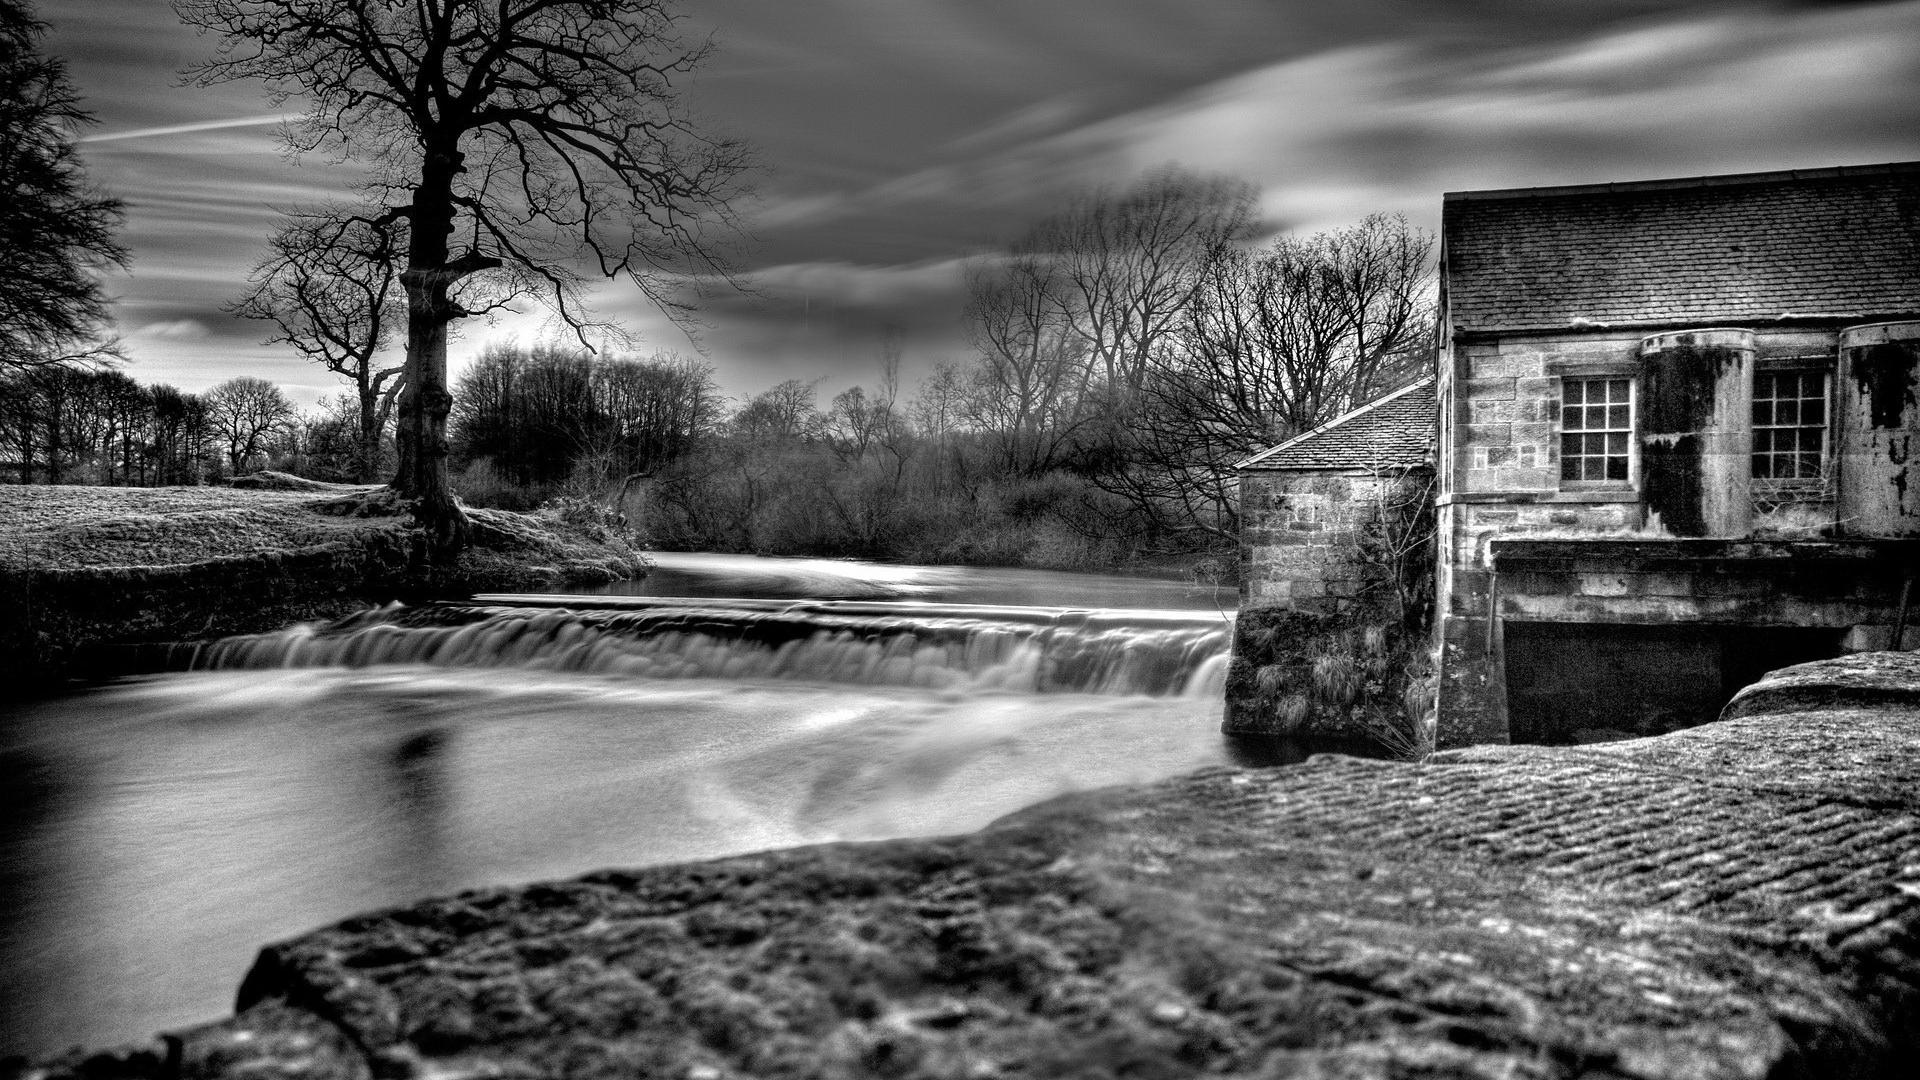 Water black and white landscapes nature dam house wallpaper 41399 1920x1080